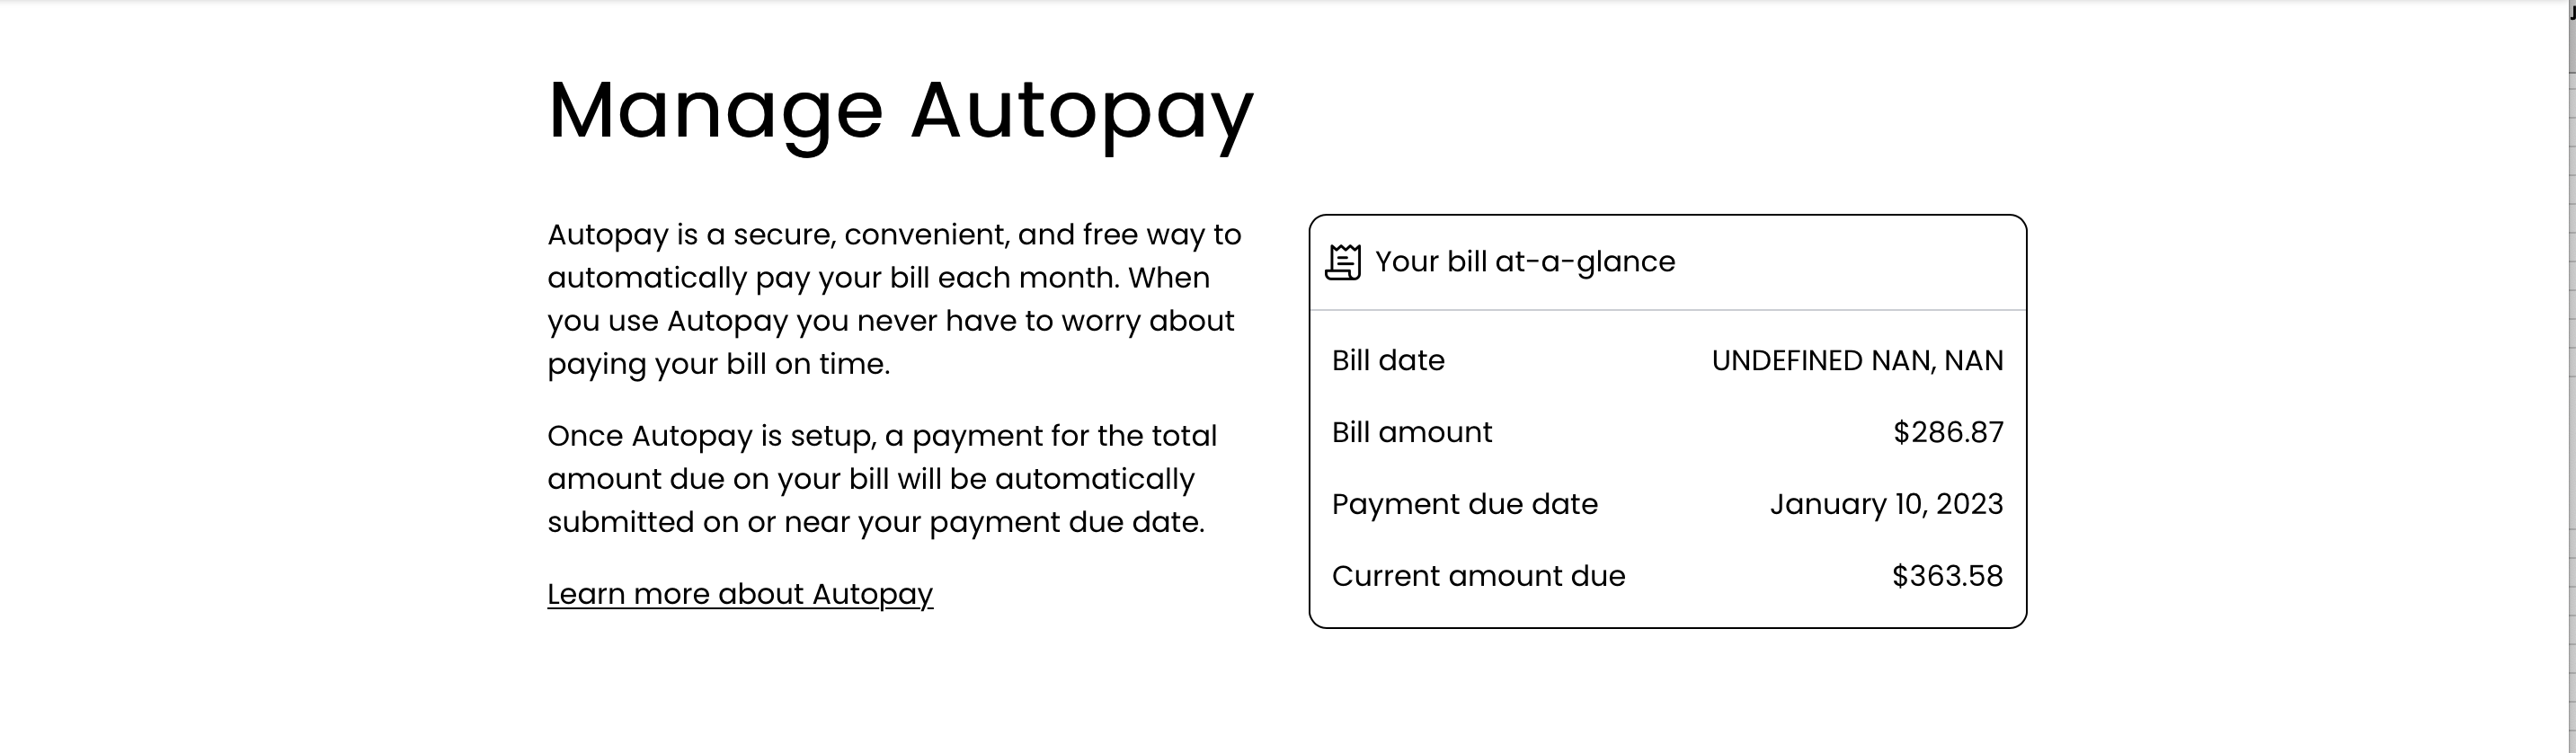 My CenturyLink Manage AutoPay screen - Not Enrolled